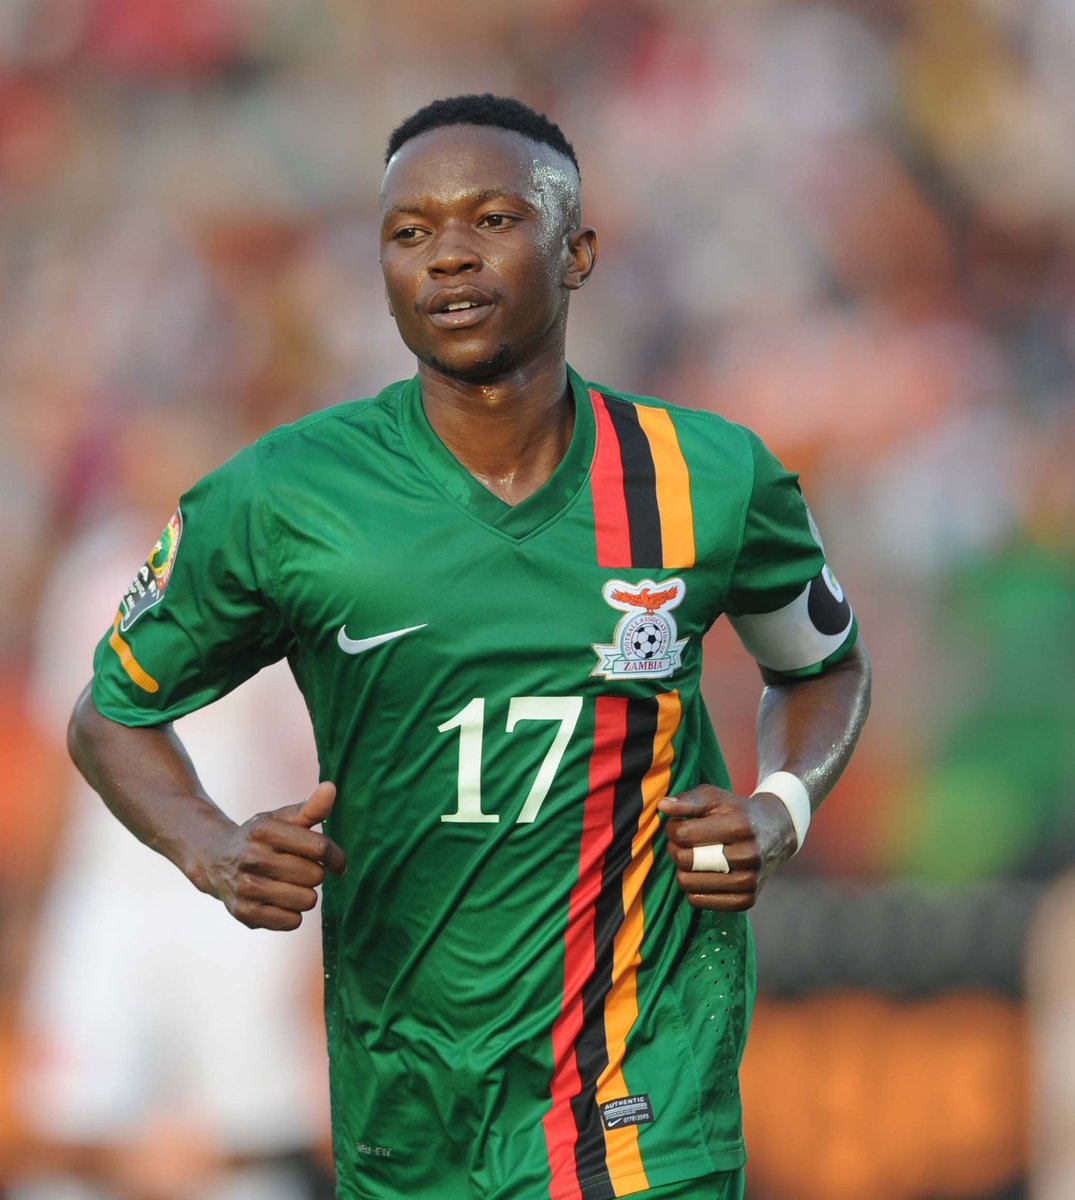 Rainford Kalaba represented our country with pride. One of the pioniers of Zambian football, for 15 years, he wore the Zambian Chipolopolo colors with pride & helped us win our first AFCON. Today after that horrific accident, I join everyone in praying for his quick recovery !!!